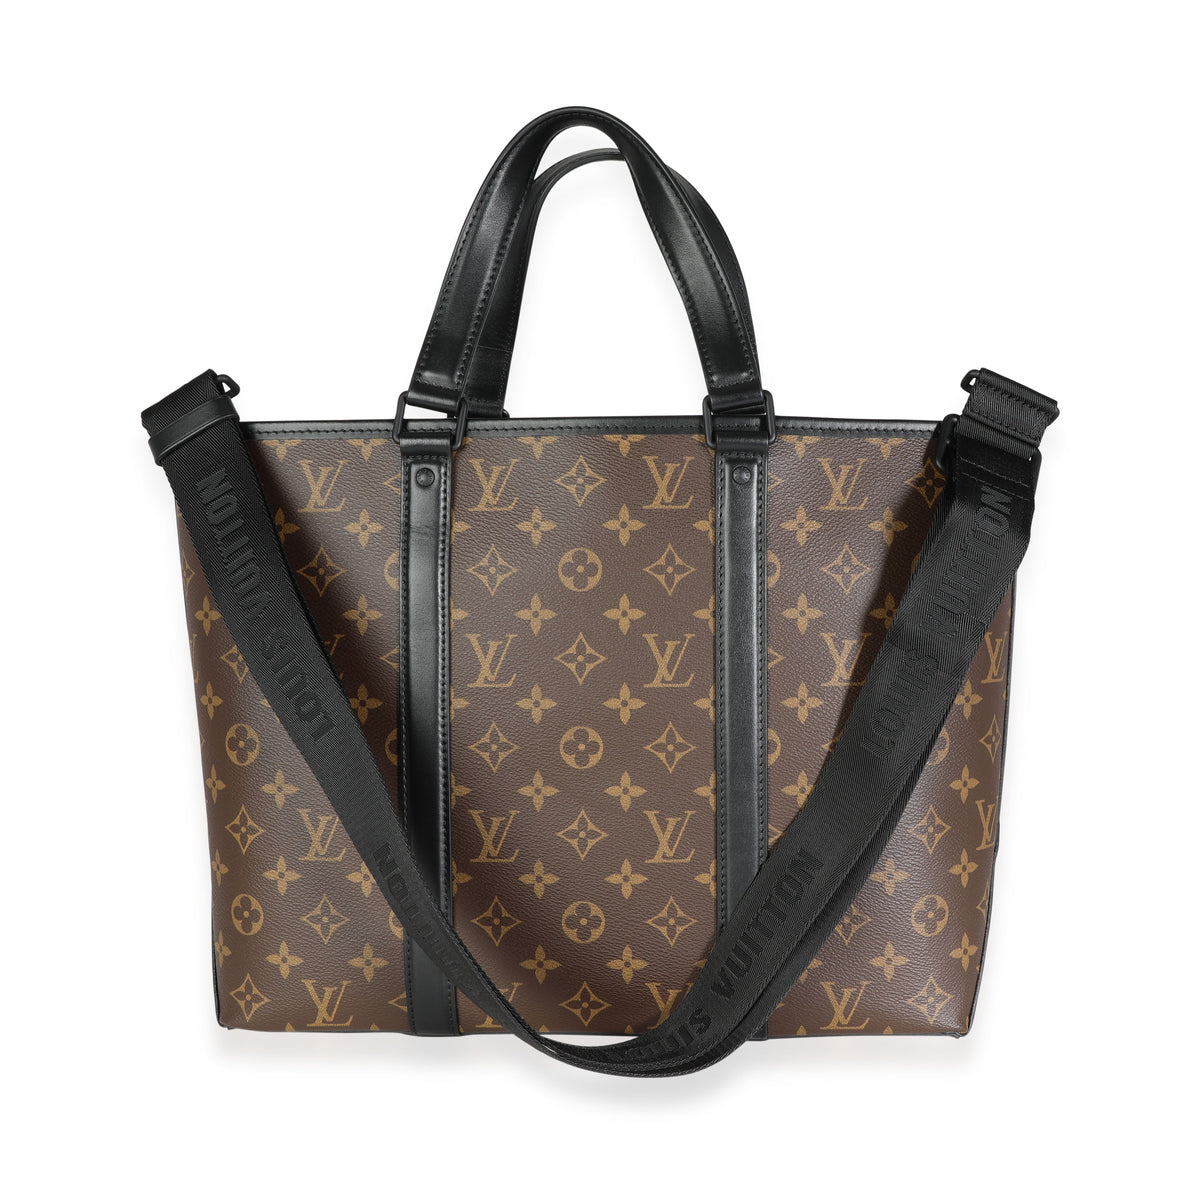 Shop Louis Vuitton 2021-22FW Weekend Tote Gm (M45733) by SkyNS